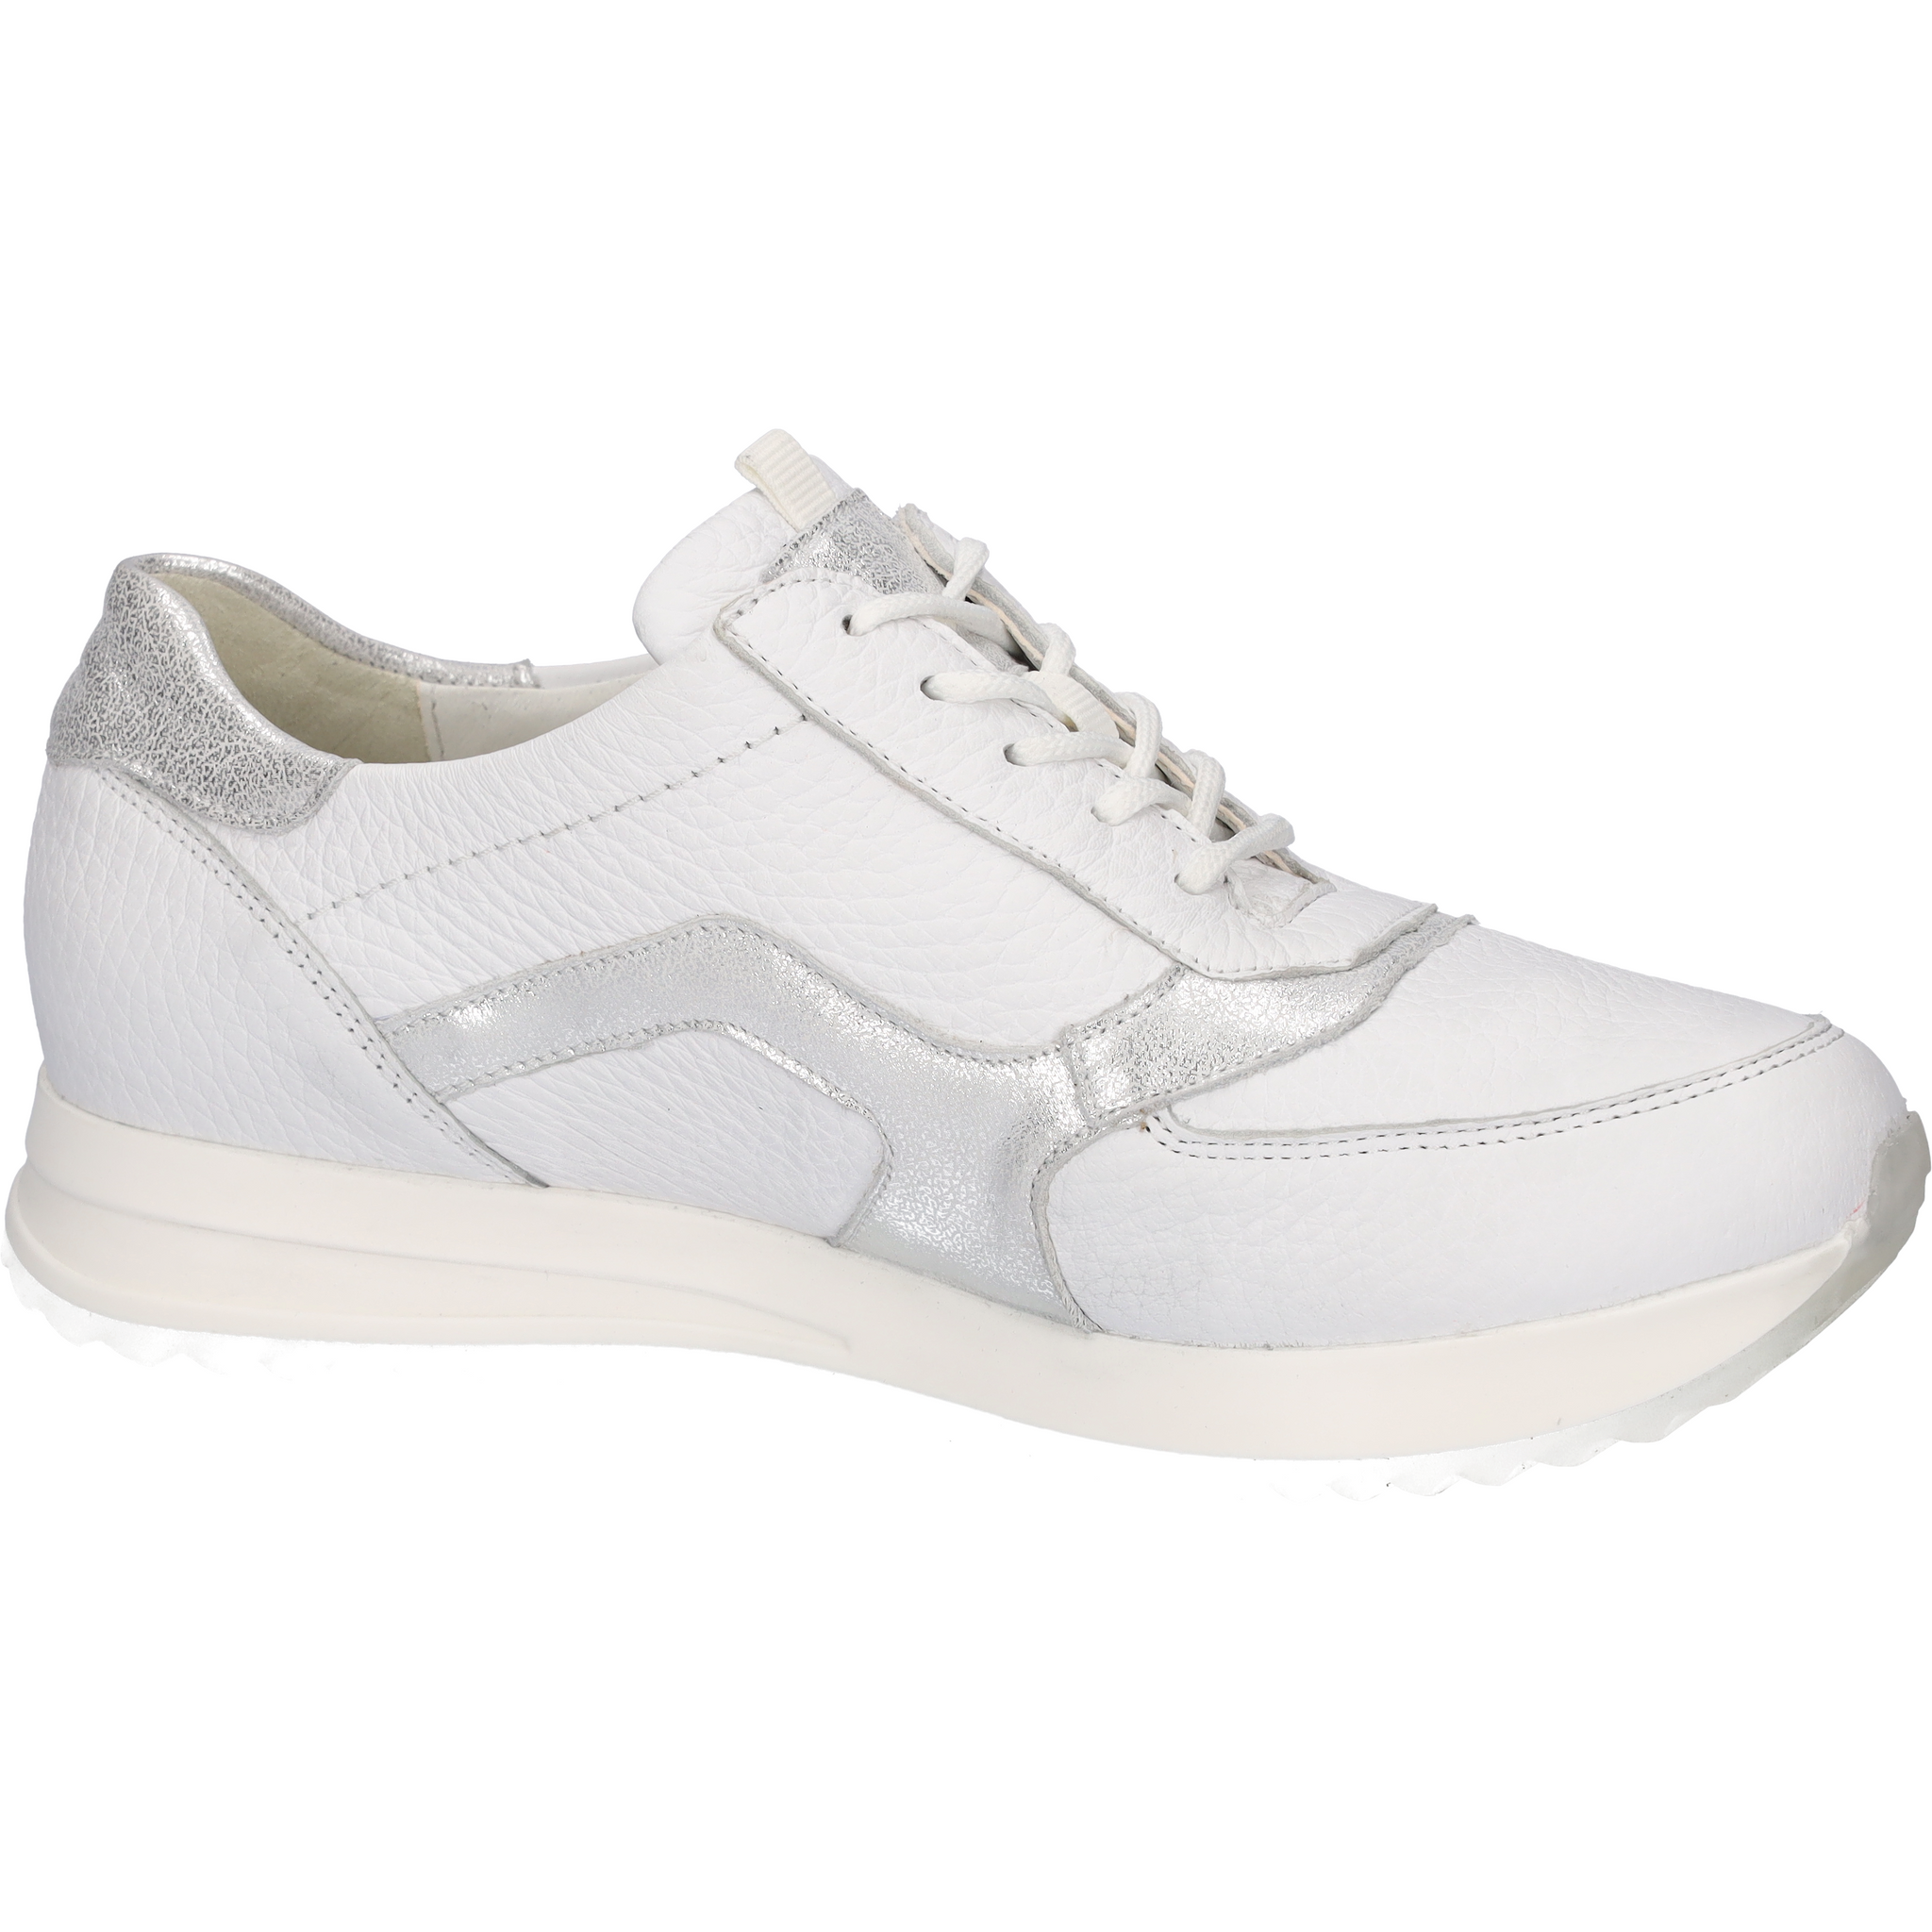 Waldlaufer H-Vicky(752002) - Ladies Trainer with Lace and Zip in White/Silver .Waldlaufer | Wide Fit Shoes | Wisemans | Bantry | West Cork | Ireland 